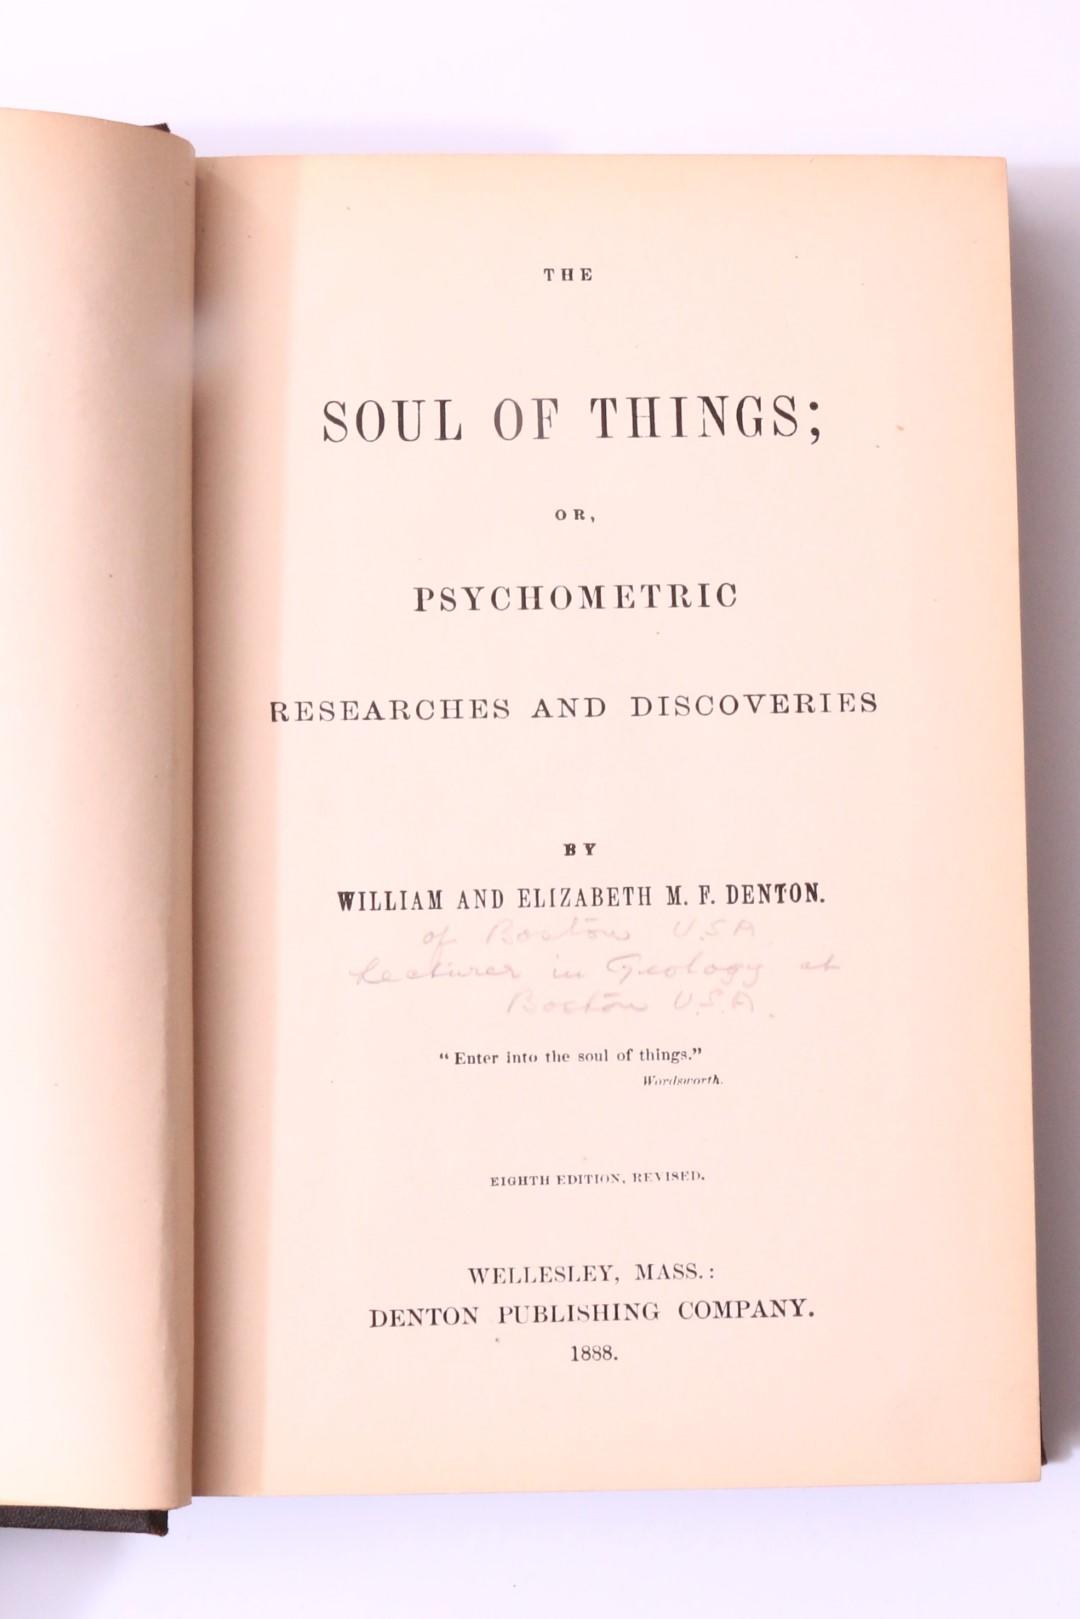 William and Elizabeth Denton - The Soul of Things, or, Psychometric Researches and Discoveries [Gustav Meyrink's Copy] - Denton Publishing Company, 1888, Later Edition.